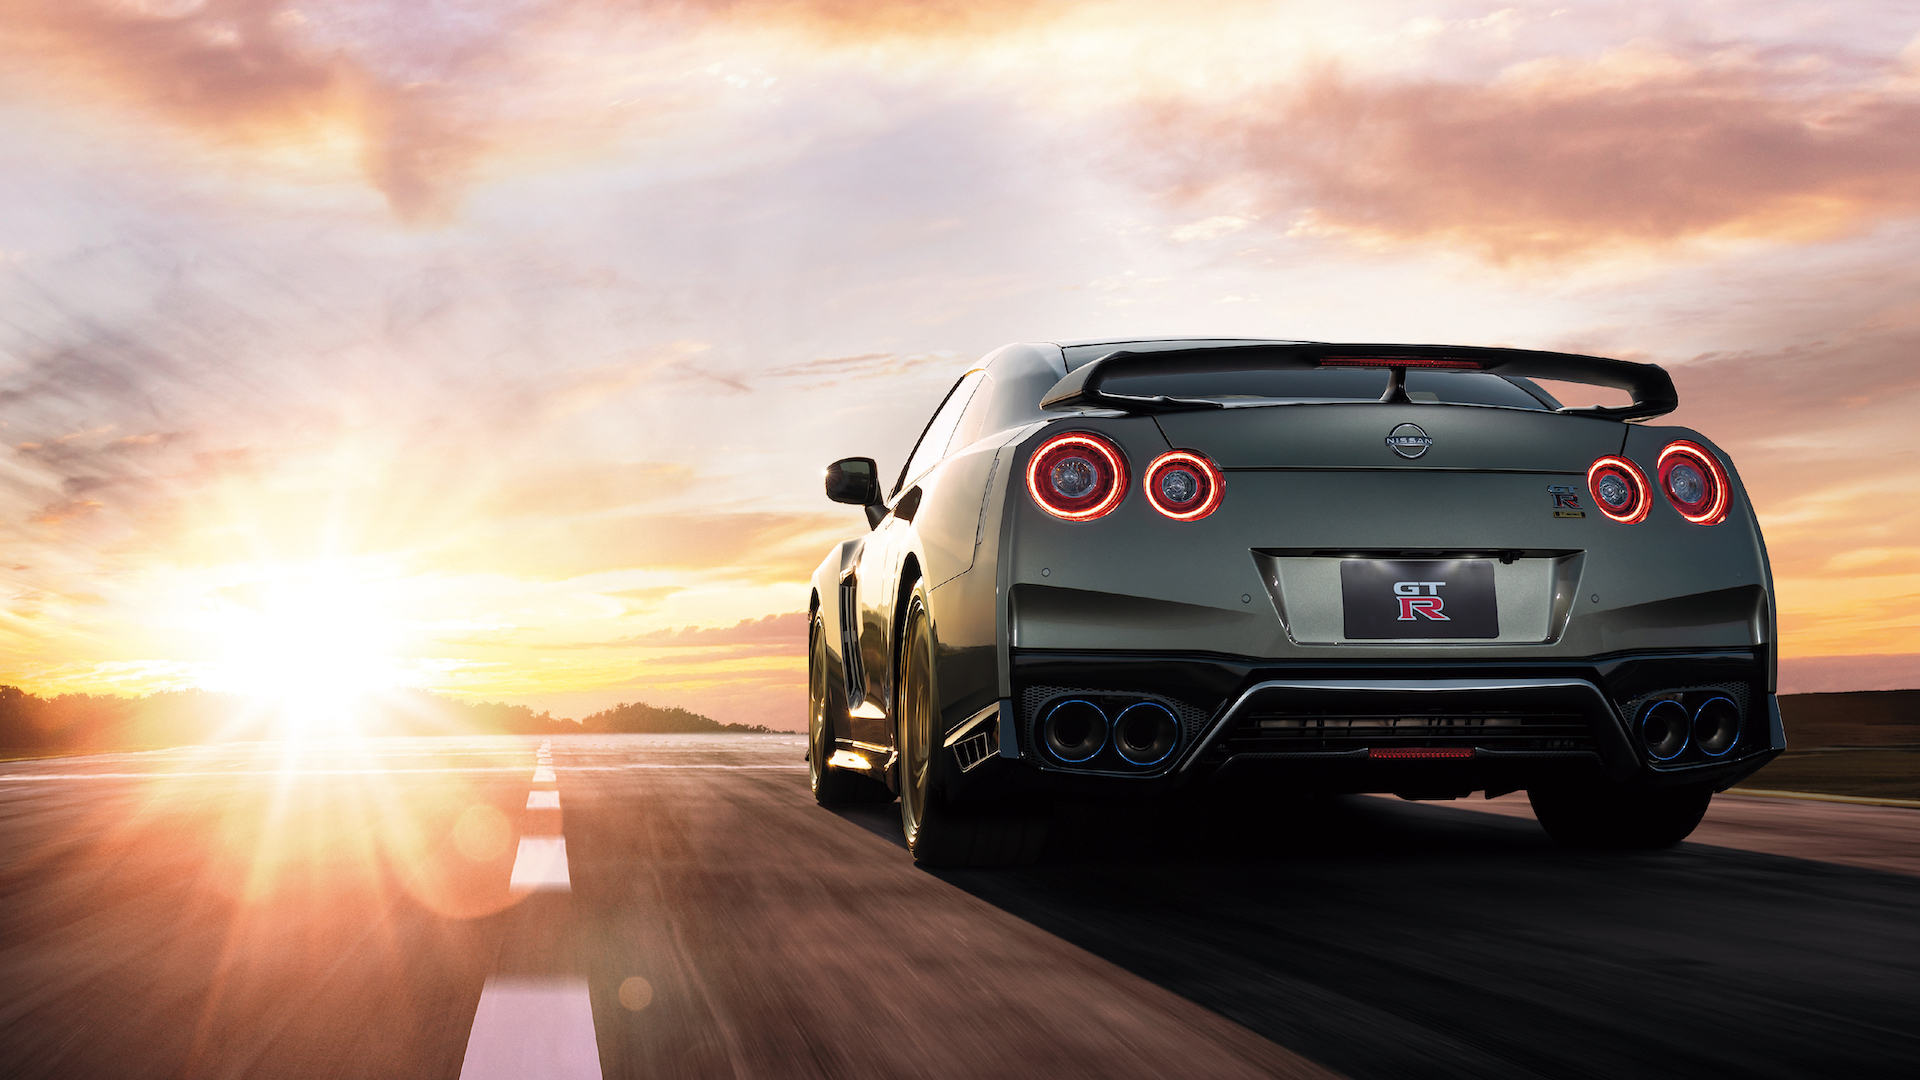 Nissan GT-R Is Sold Out for This Year, and It's Not Clear What's Next